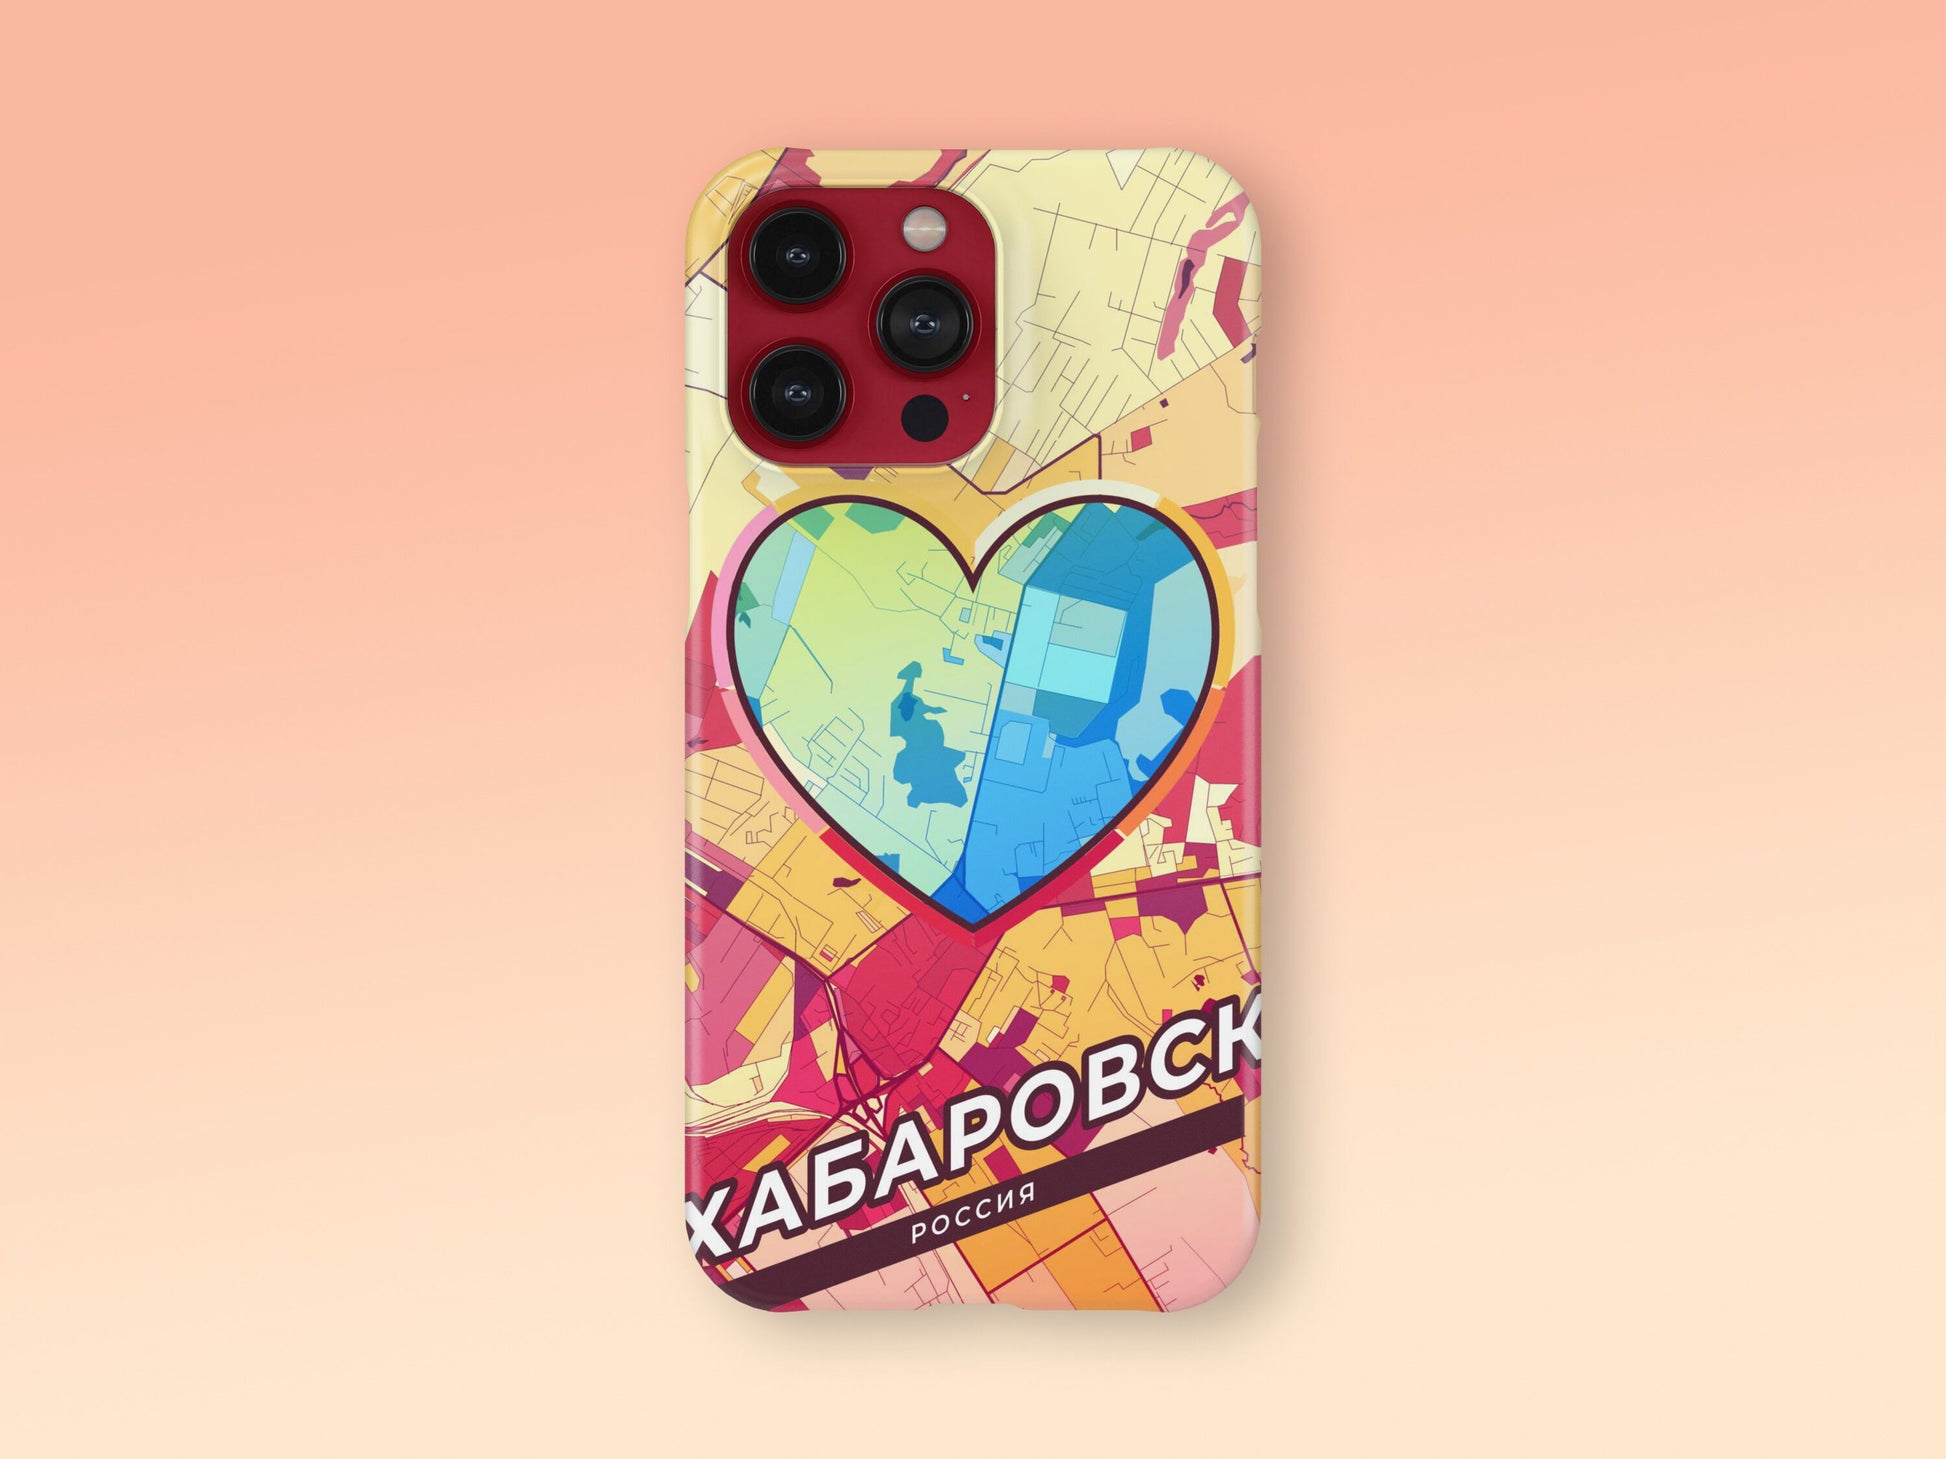 Khabarovsk Russia slim phone case with colorful icon. Birthday, wedding or housewarming gift. Couple match cases. 2